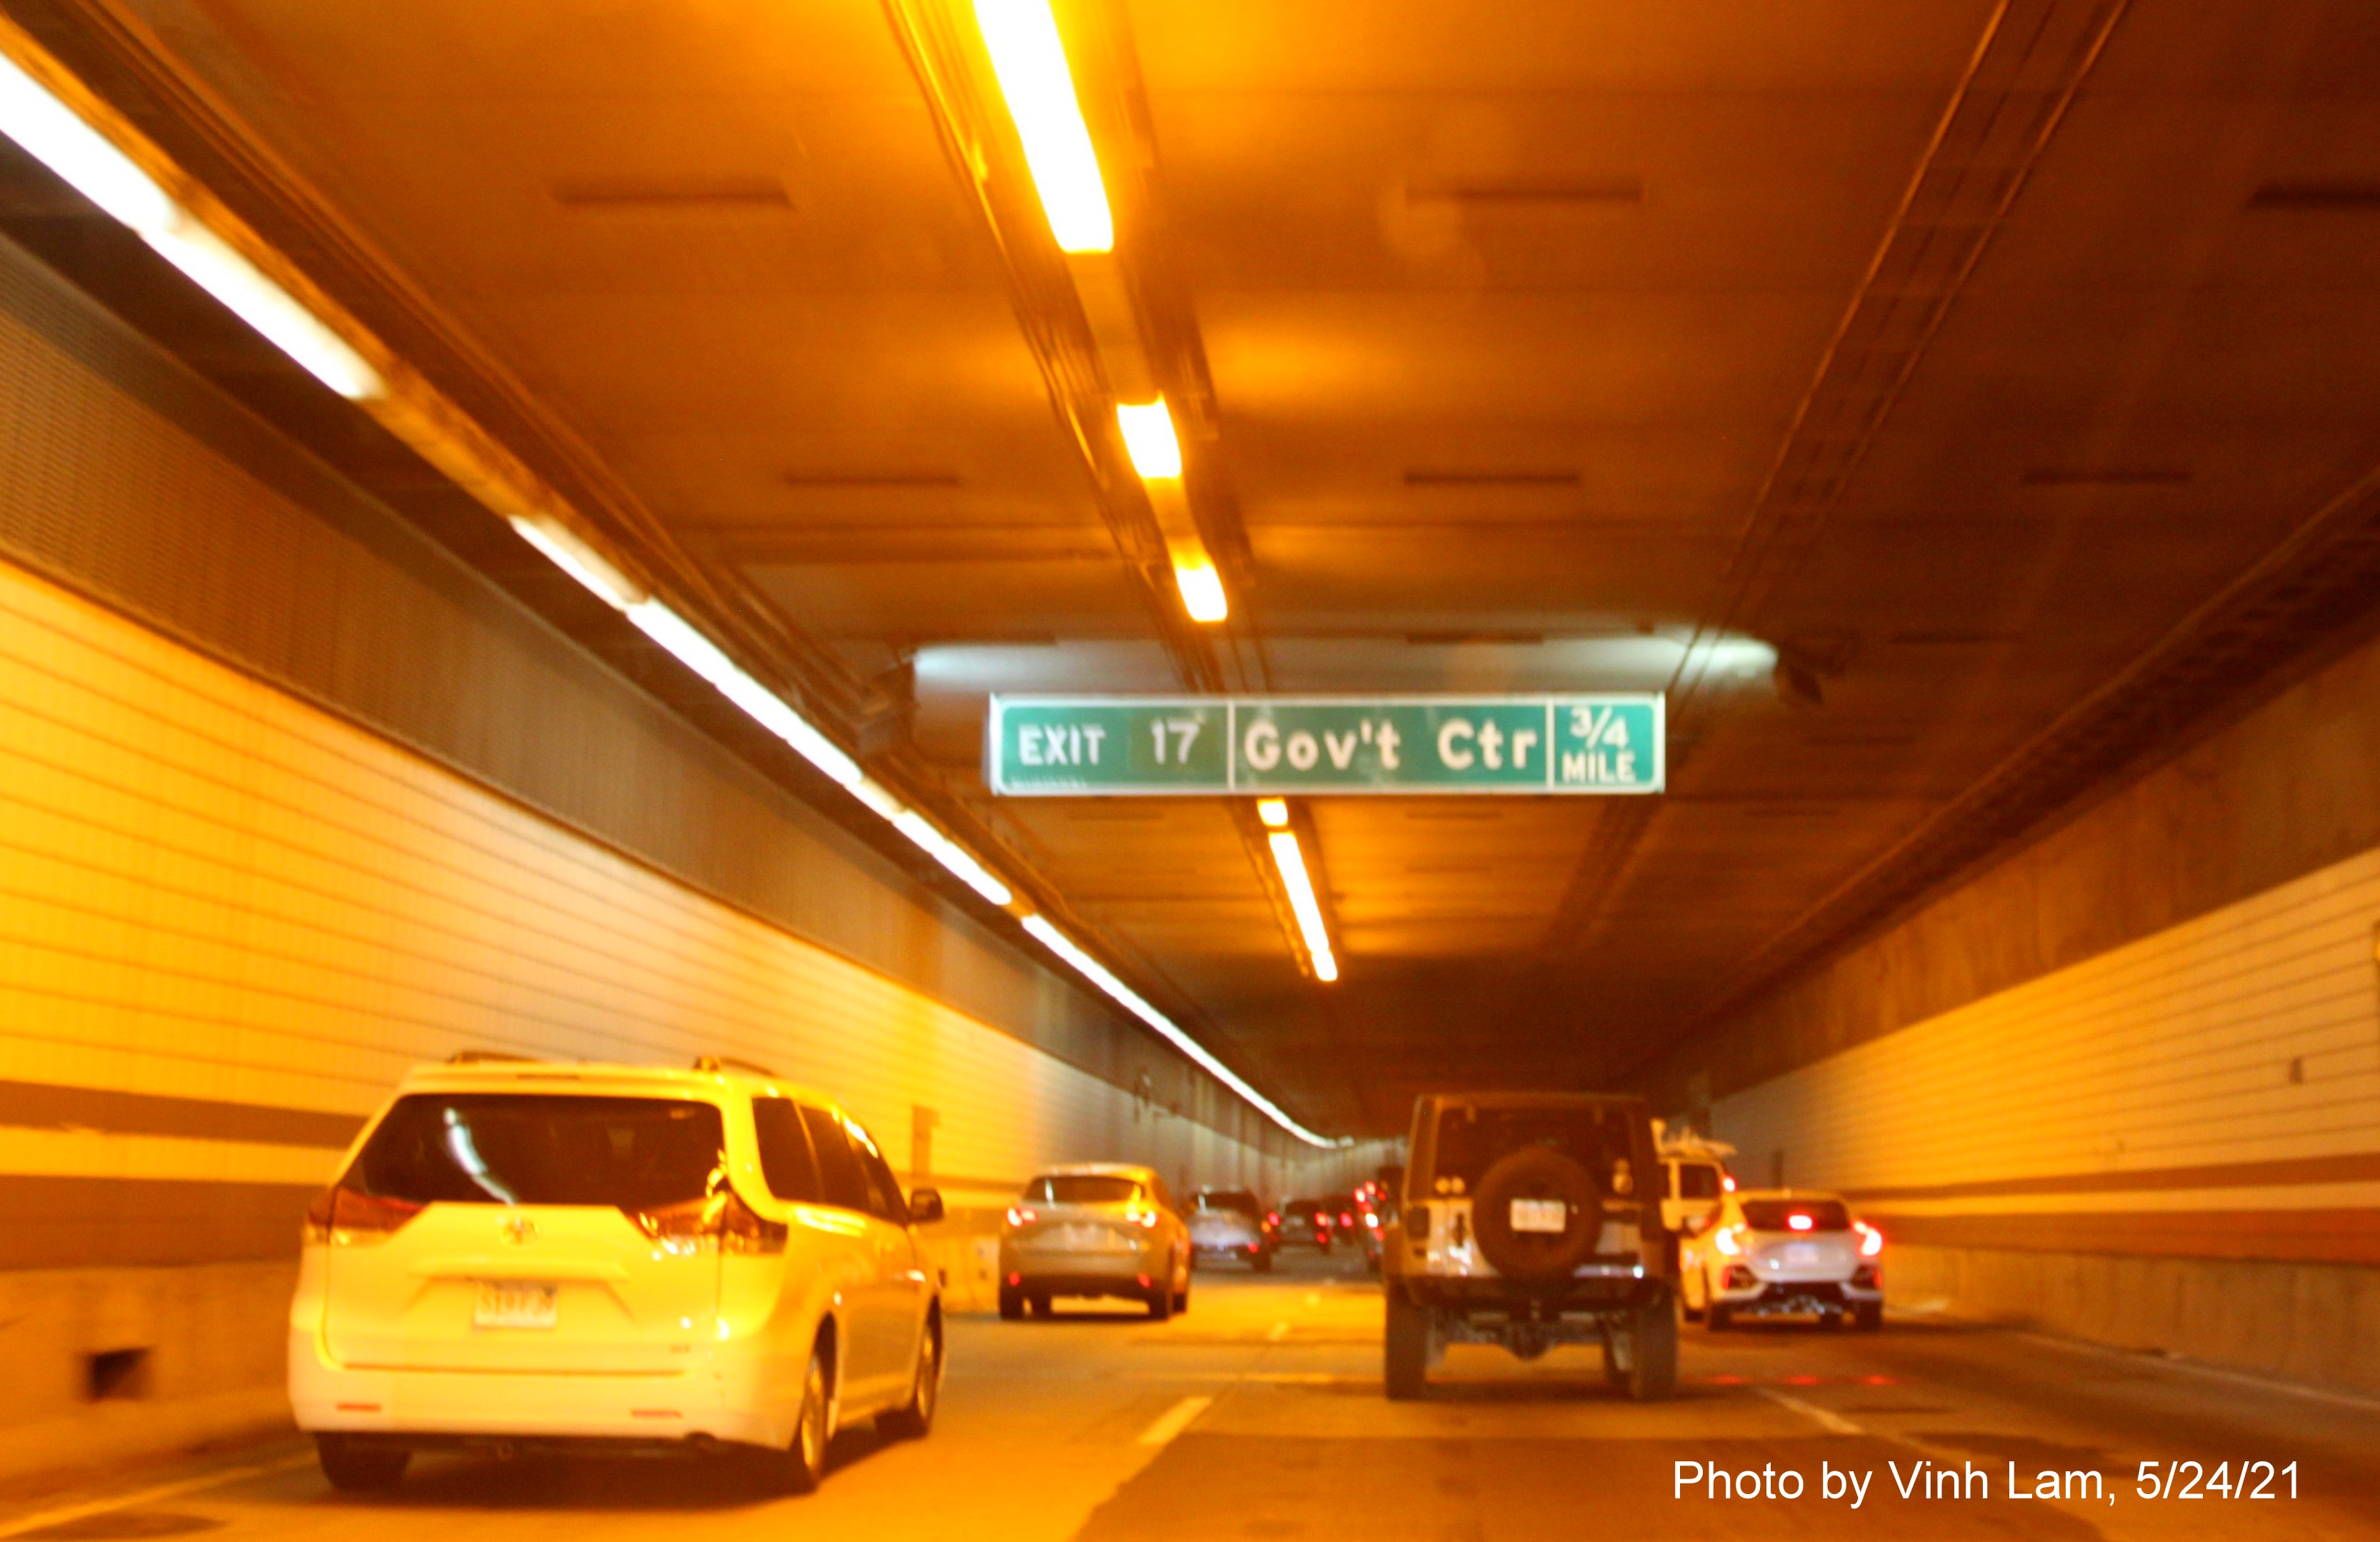 Image of 3/4 mile advance tunnel ceiling mounted sign for Government Center exit with new milepost based exit number on I-93 North in O'Neill Tunnel in Boston, by Vinh Lam, May 2021 